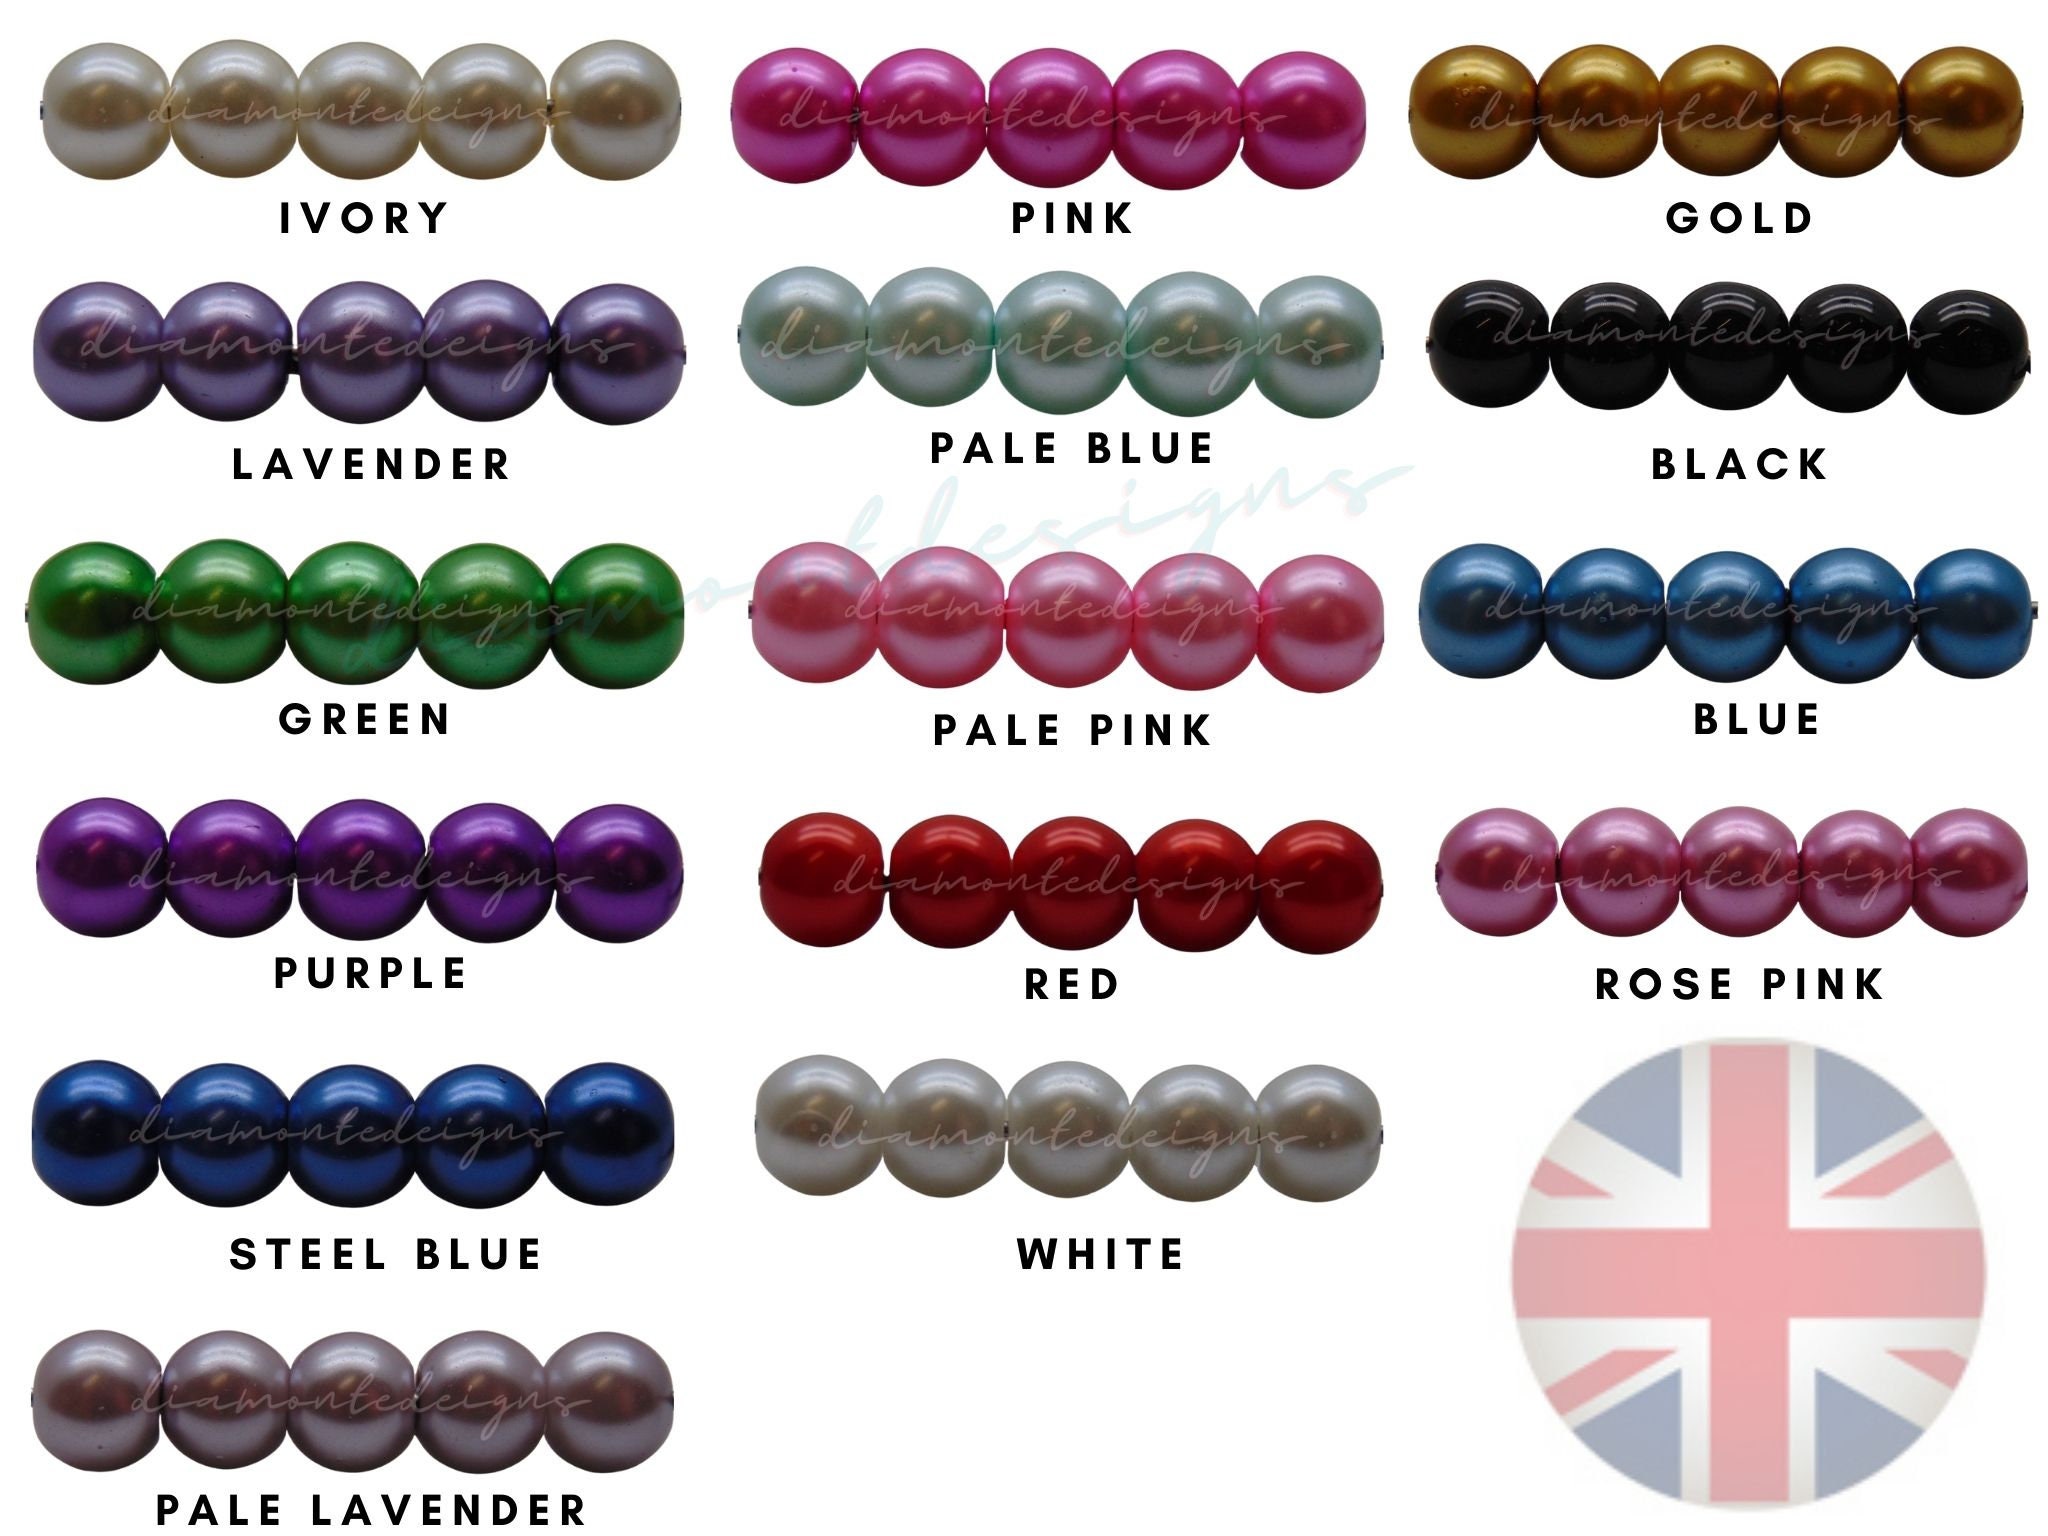 Marbled Glass Beads 200x 6mm 100x 8mm 50x 10mm Colour Choice Jewellery  Making